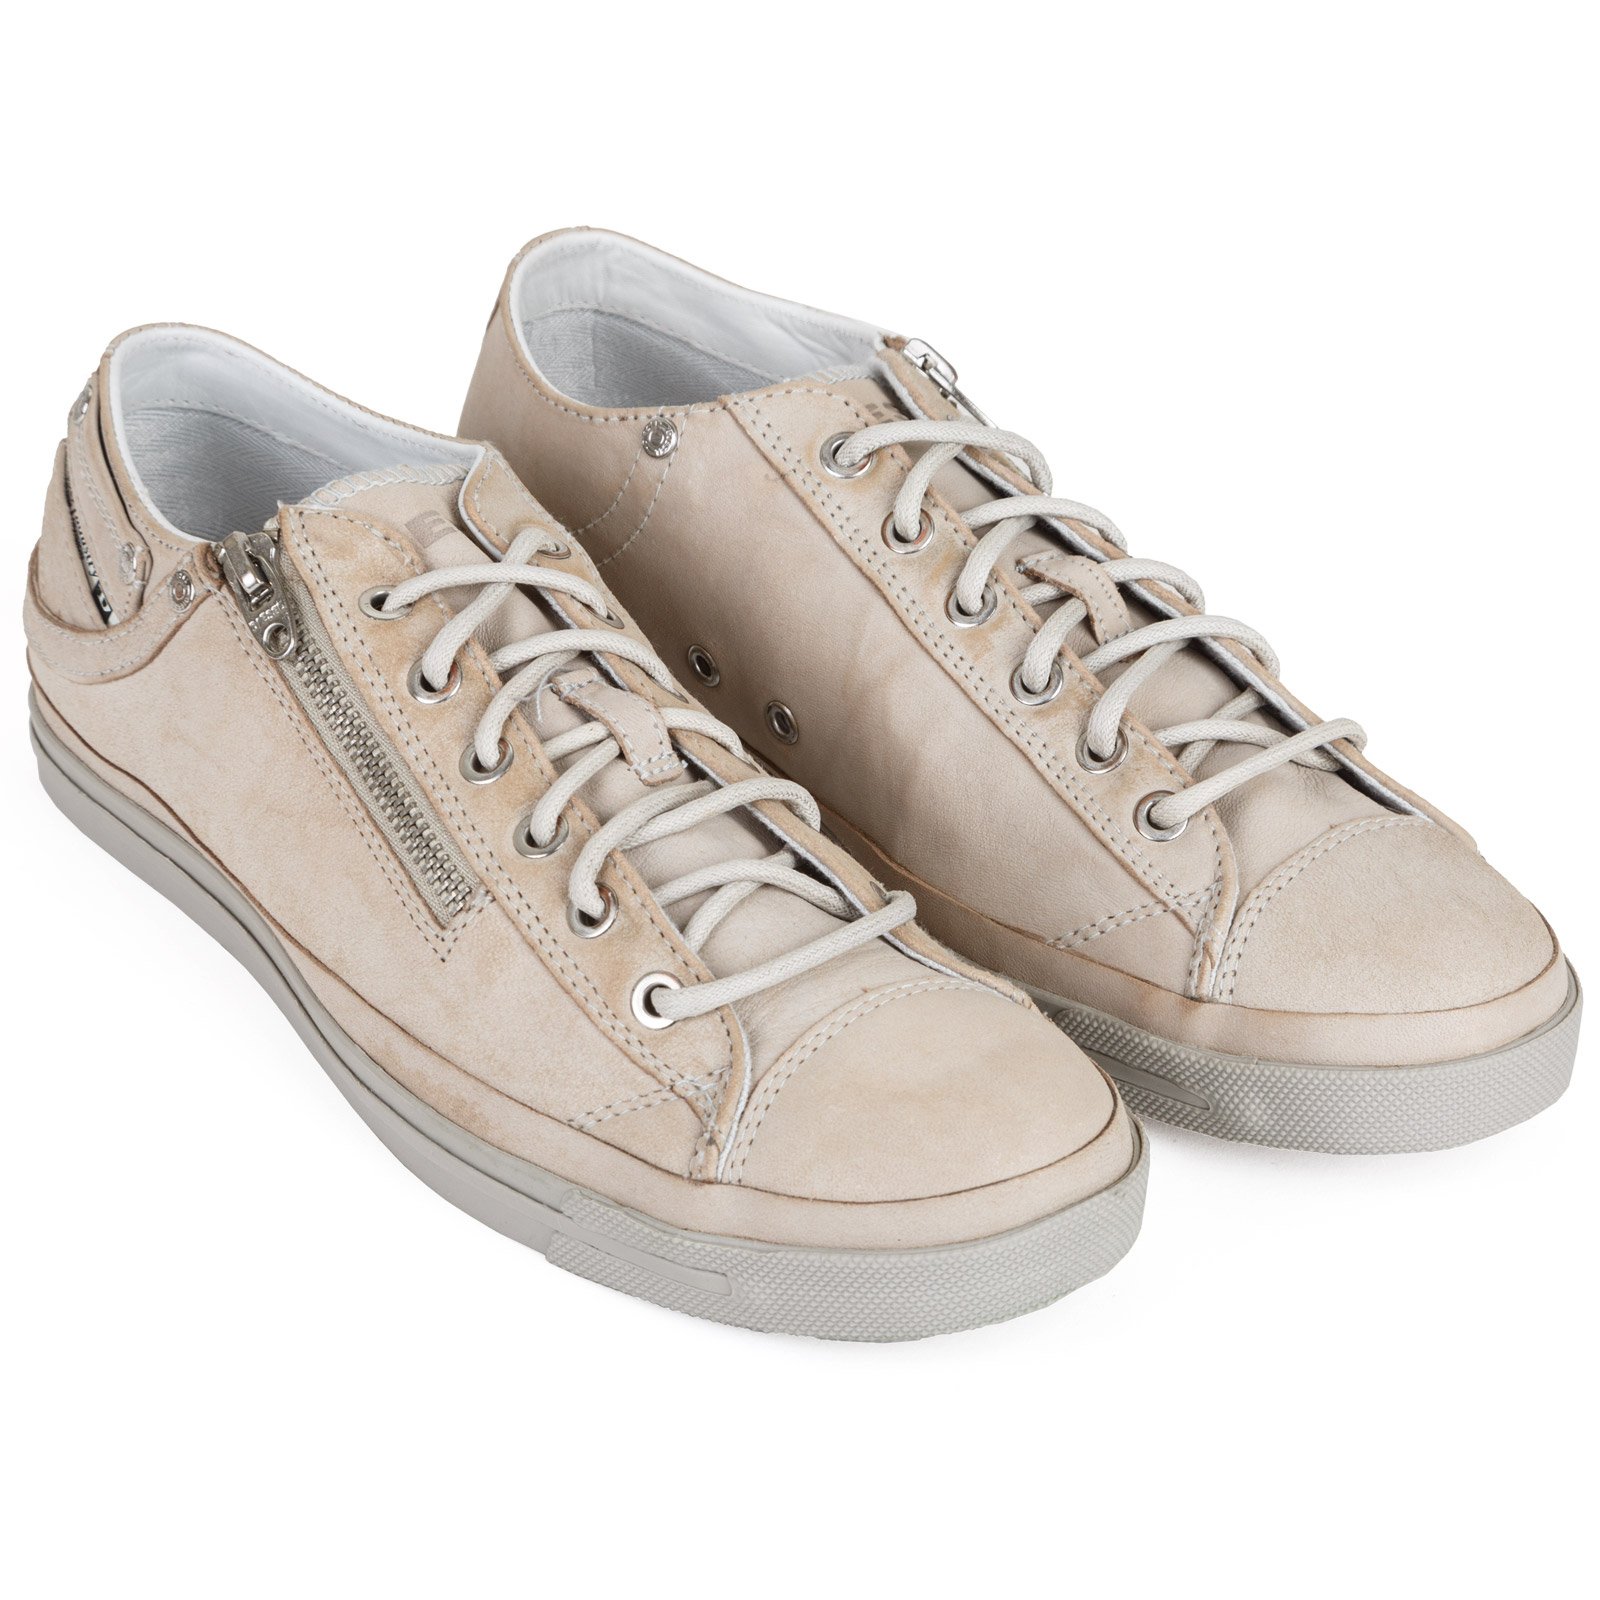 ExpoZip Low Leather Sneakers Shoes & BootsCasual Shoes FA2 Online